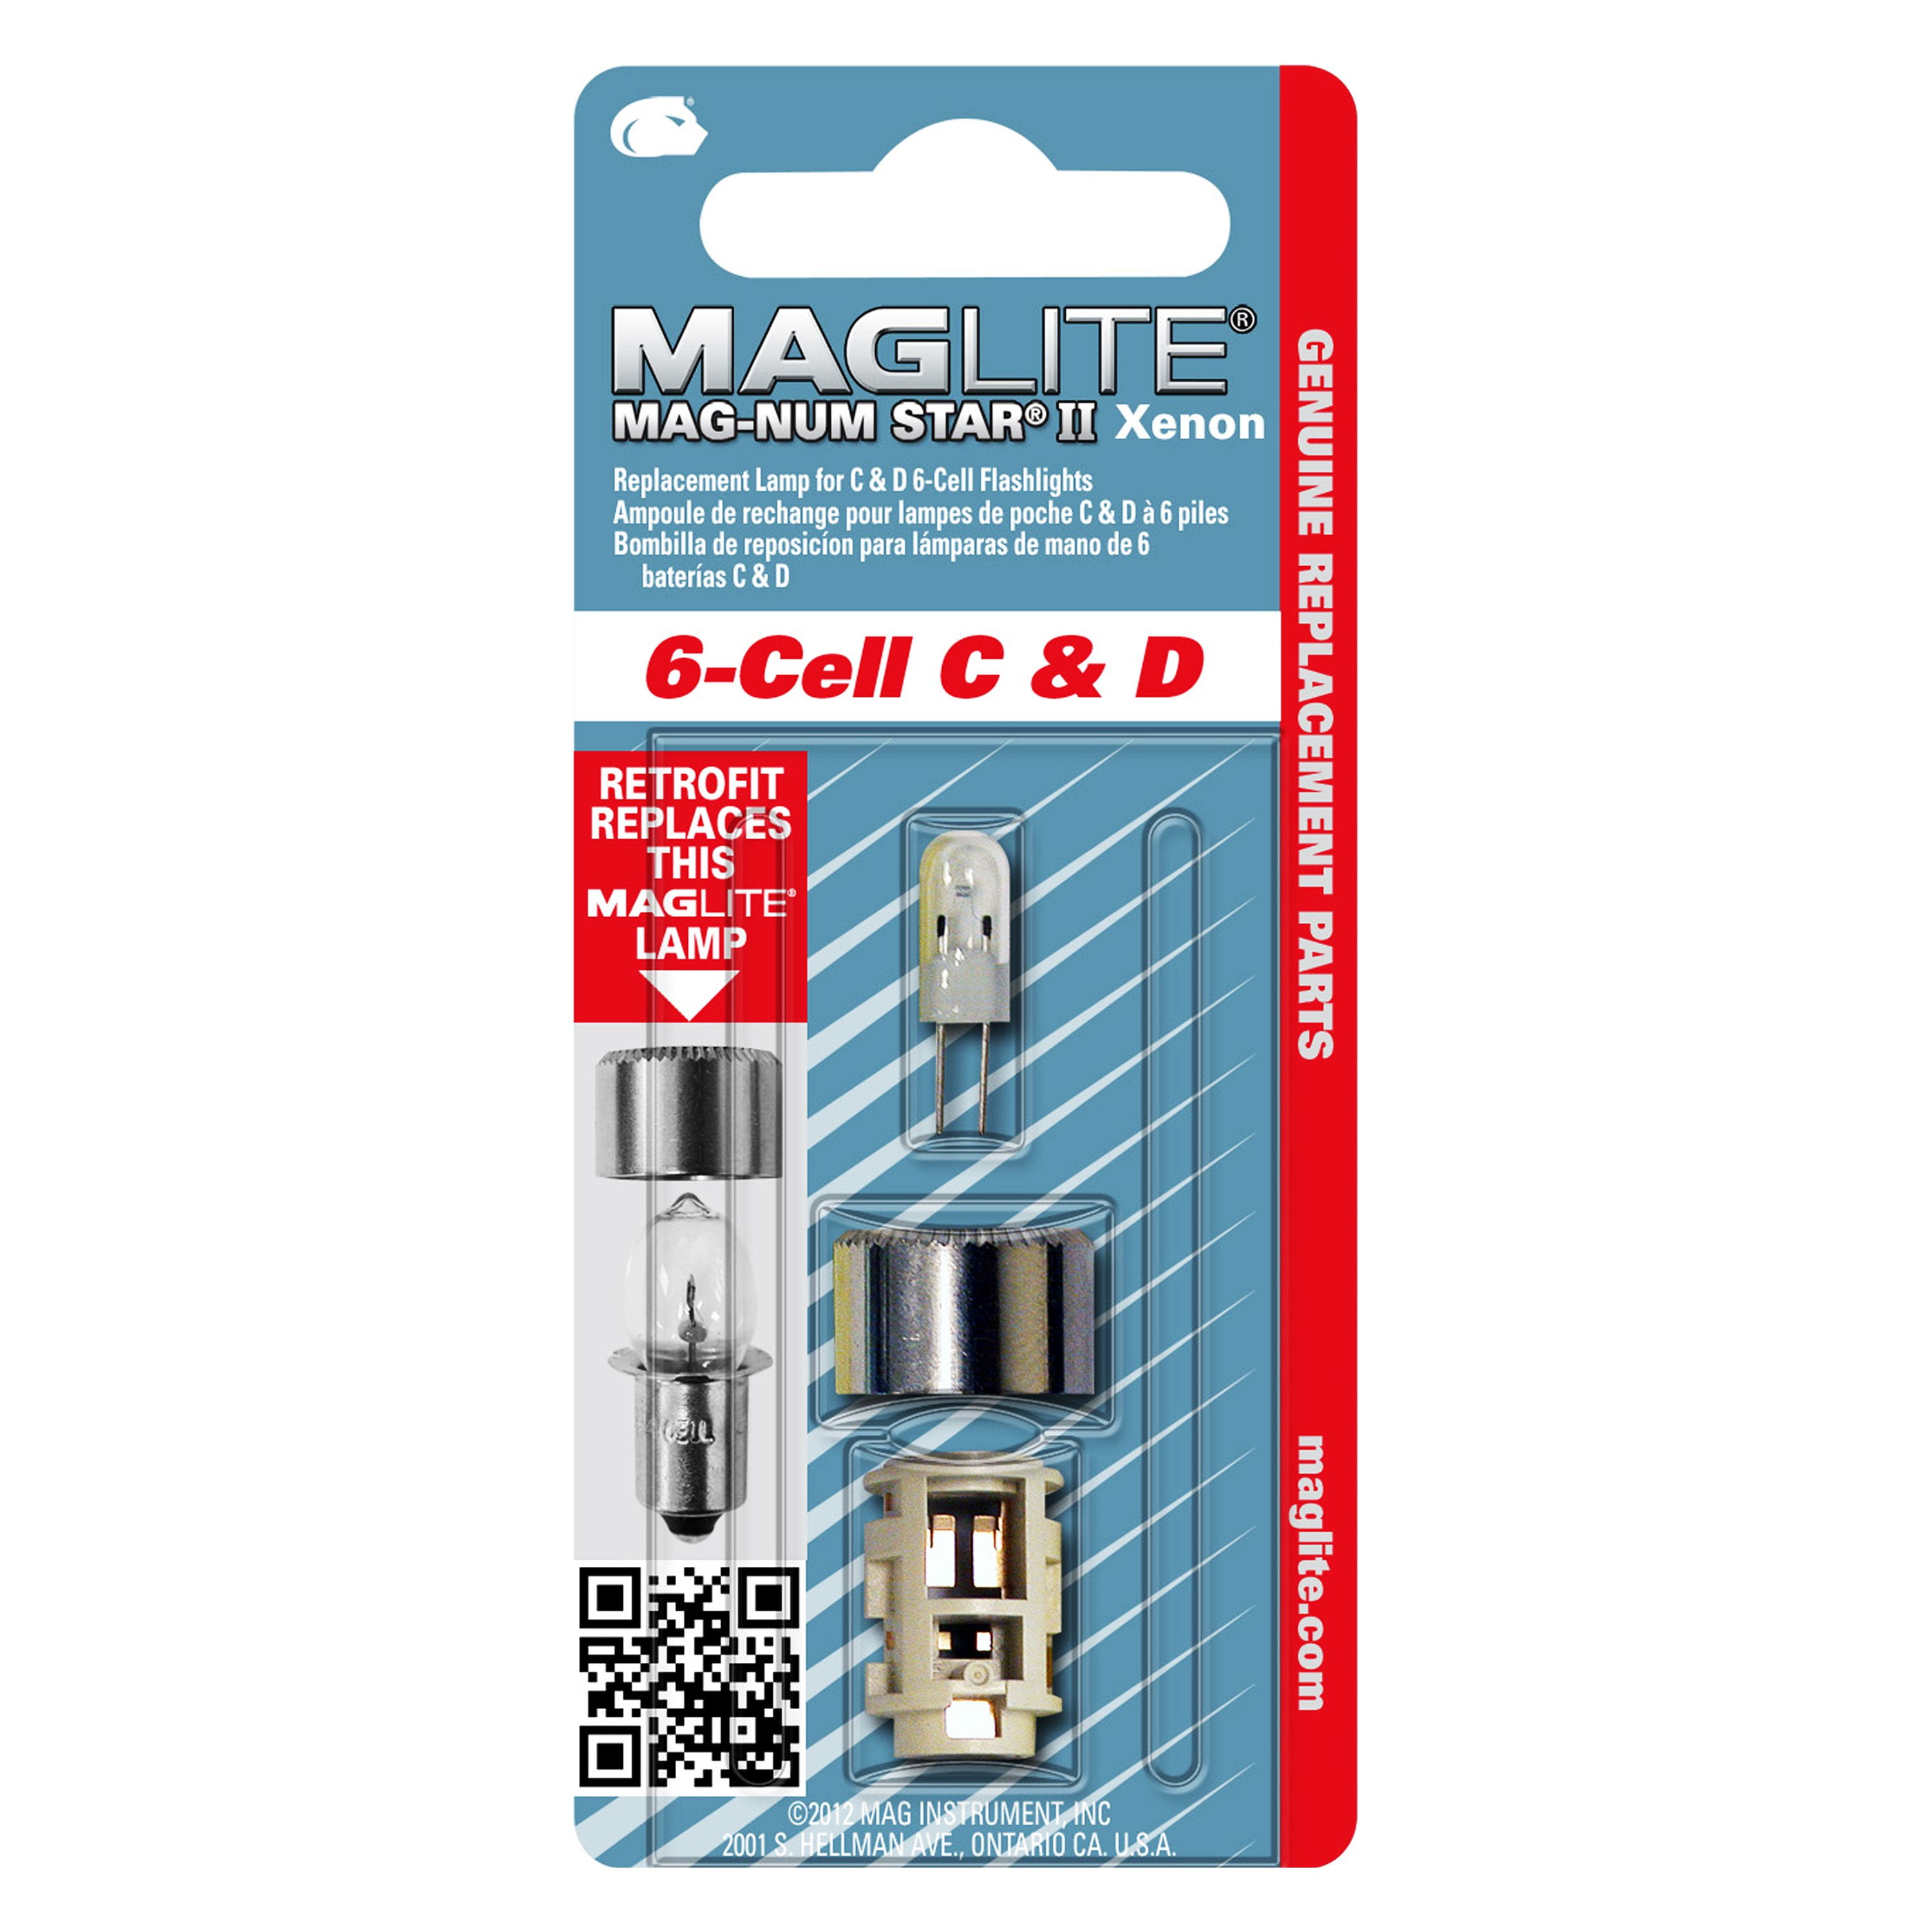 Maglite Replacement Lamp for 6-Cell C & D Flashlight NEW 1 pk LMXA601 